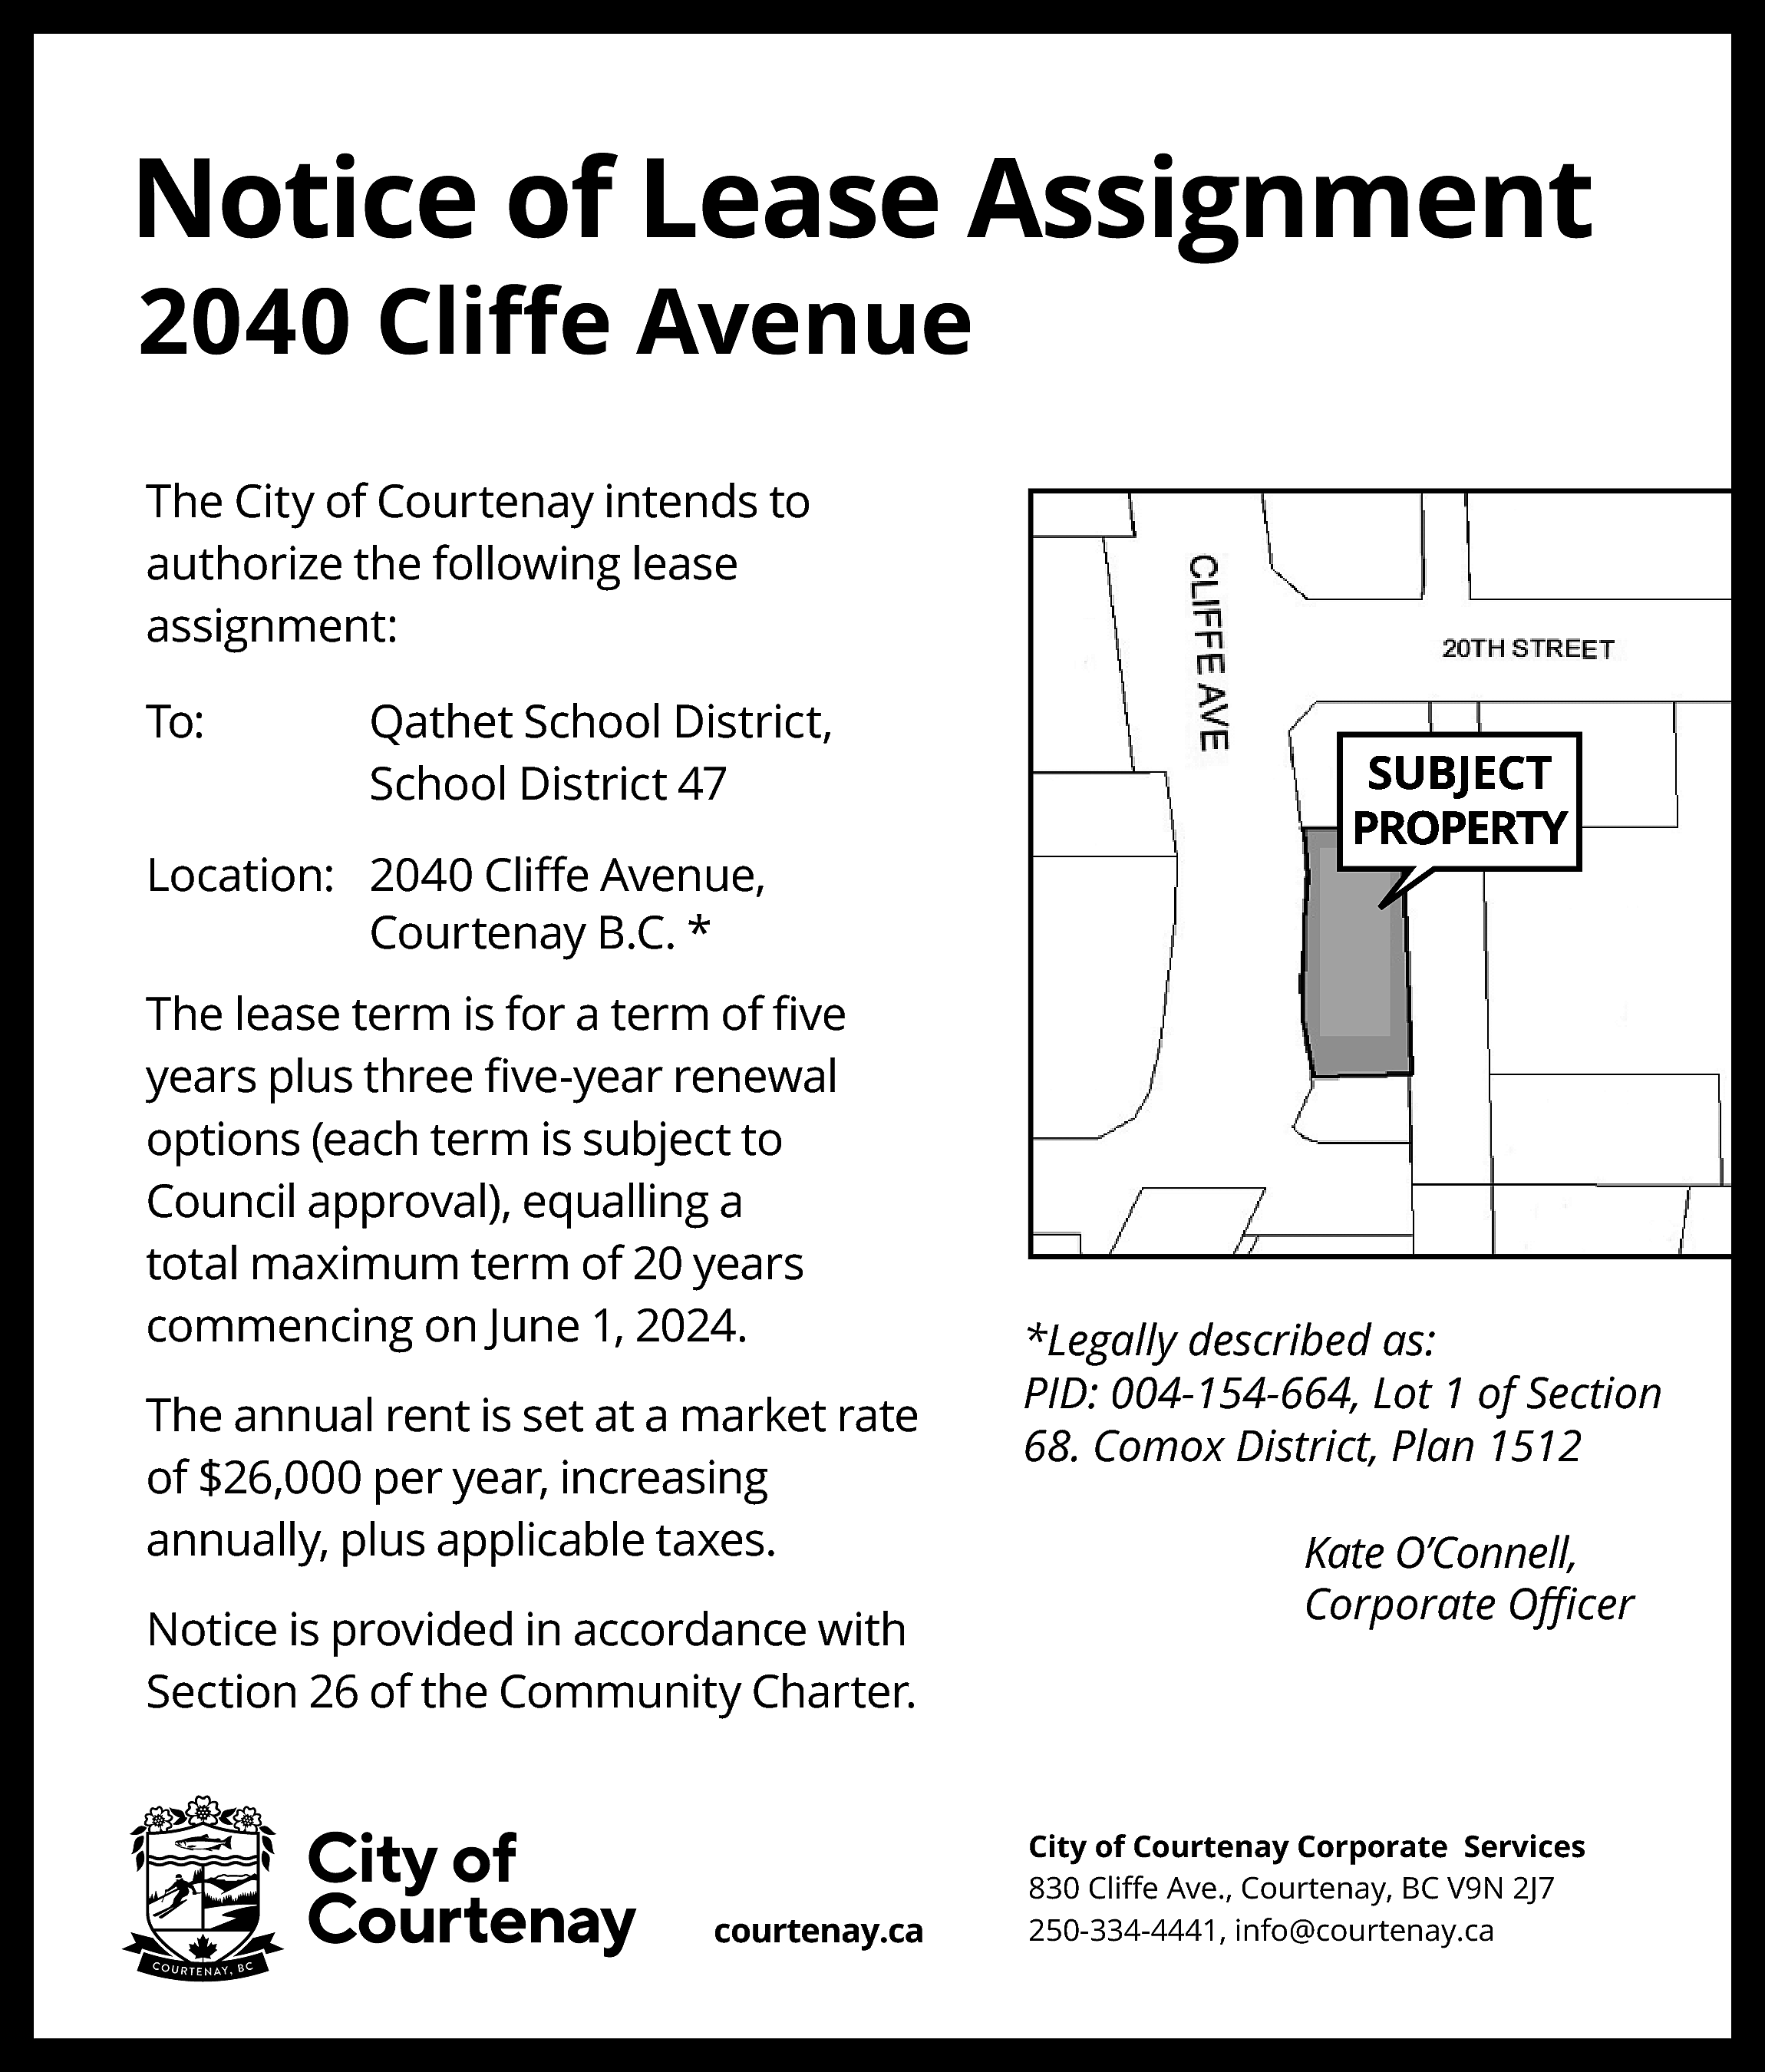 Notice of Lease Assignment <br>2040  Notice of Lease Assignment  2040 Cliﬀe Avenue  The City of Courtenay intends to  authorize the following lease  assignment:  To:    Qathet School District,  School District 47    Location: 2040 Cliﬀe Avenue,  Courtenay B.C. *  The lease term is for a term of ﬁve  years plus three ﬁve-year renewal  options (each term is subject to  Council approval), equalling a  total maximum term of 20 years  commencing on June 1, 2024.  The annual rent is set at a market rate  of $26,000 per year, increasing  annually, plus applicable taxes.  Notice is provided in accordance with  Section 26 of the Community Charter.    courtenay.ca    SUBJECT  PROPERTY    *Legally described as:  PID: 004-154-664, Lot 1 of Section  68. Comox District, Plan 1512  Kate O’Connell,  Corporate Oﬃcer    City of Courtenay Corporate Services  830 Cliﬀe Ave., Courtenay, BC V9N 2J7  250-334-4441, info@courtenay.ca    